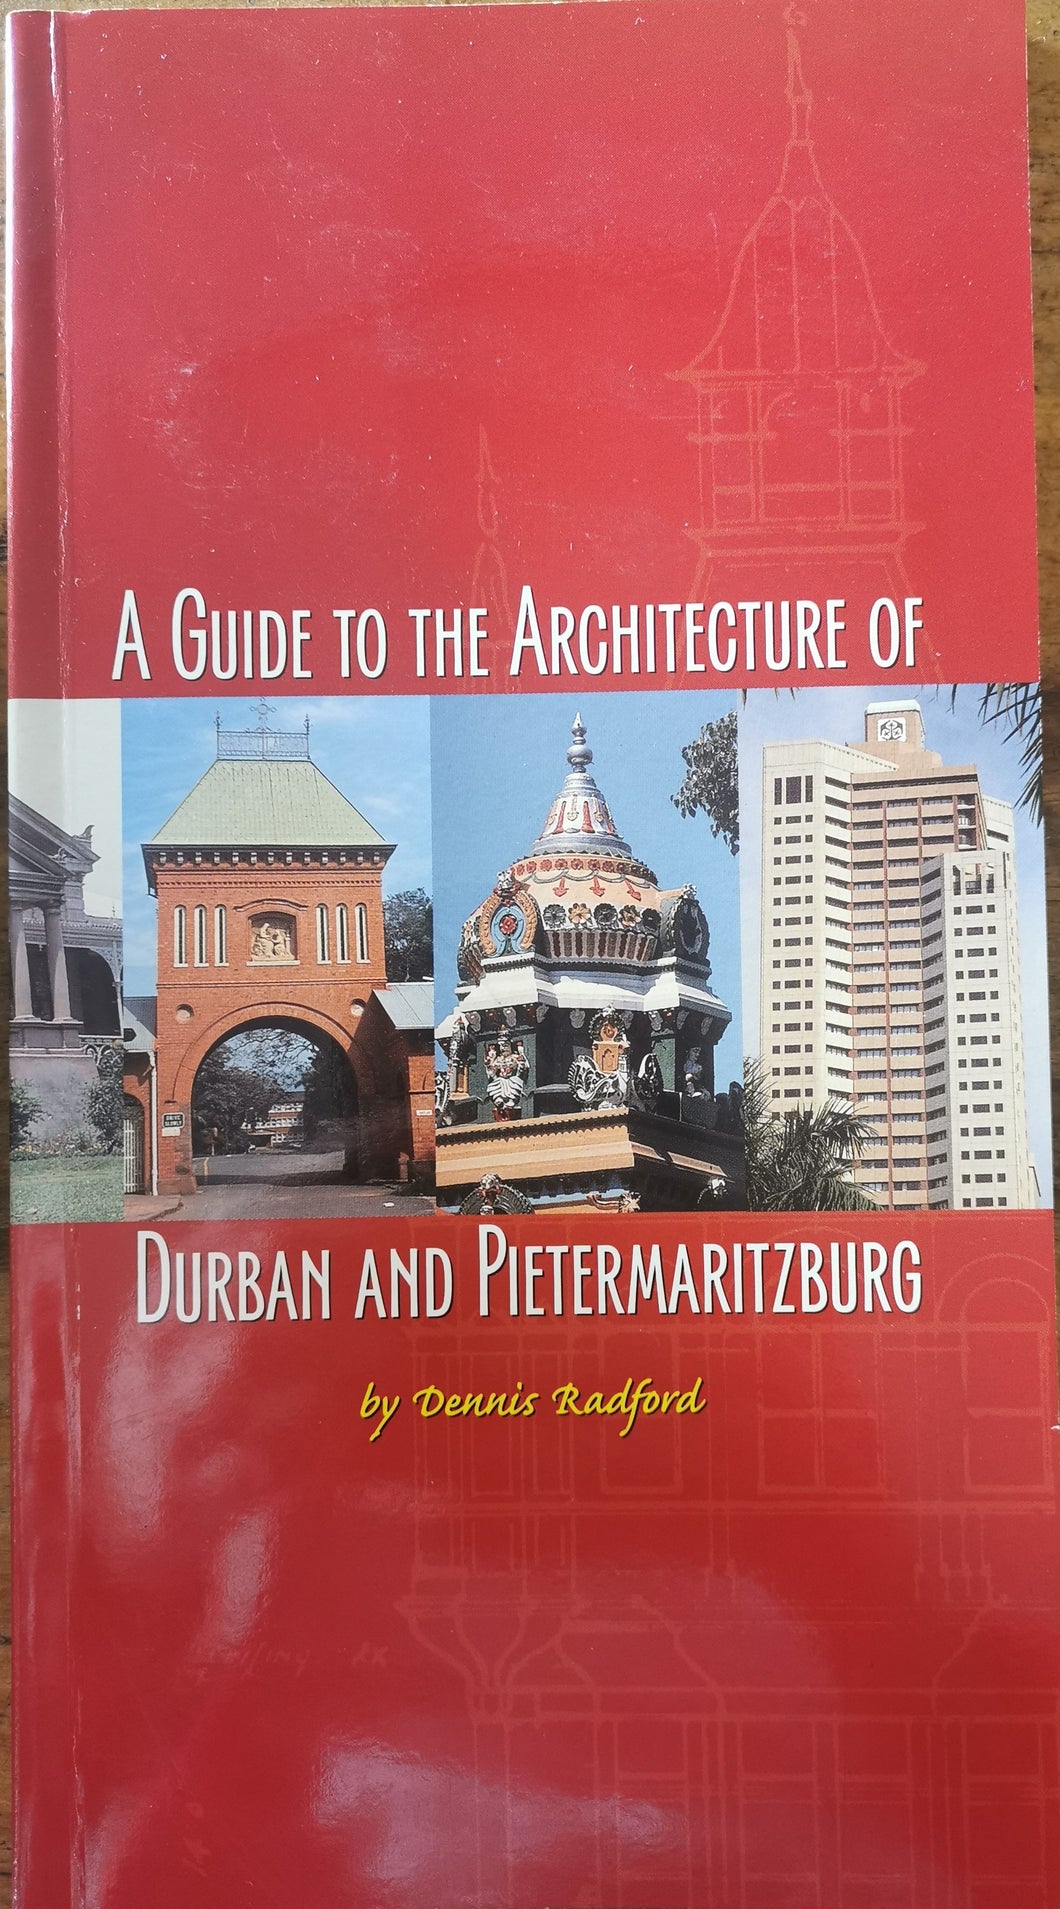 A Guide to the Architecture of Durban and Pietermaritzburg - Dennis Radford